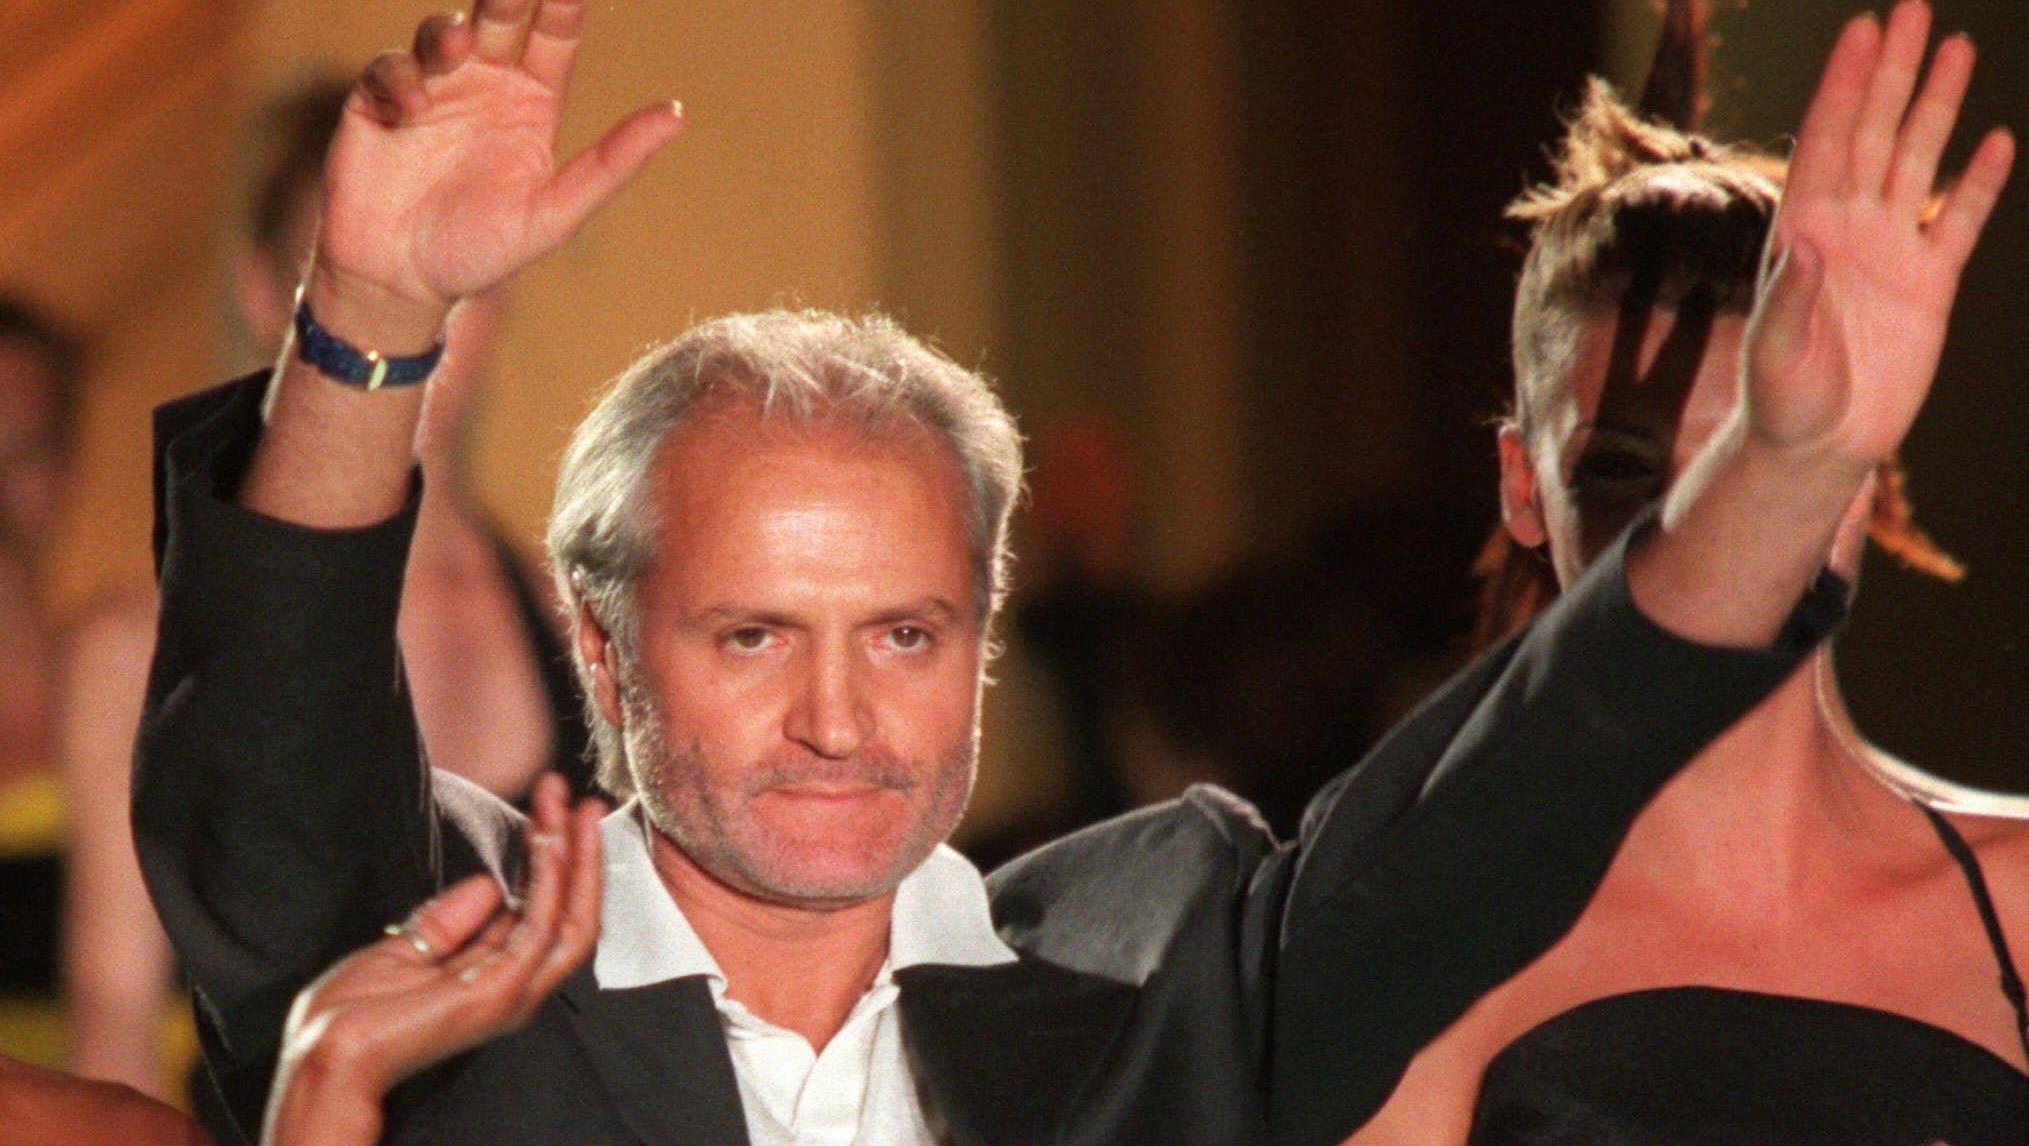 Gianni Versace: How we covered the fashion designer's assassination